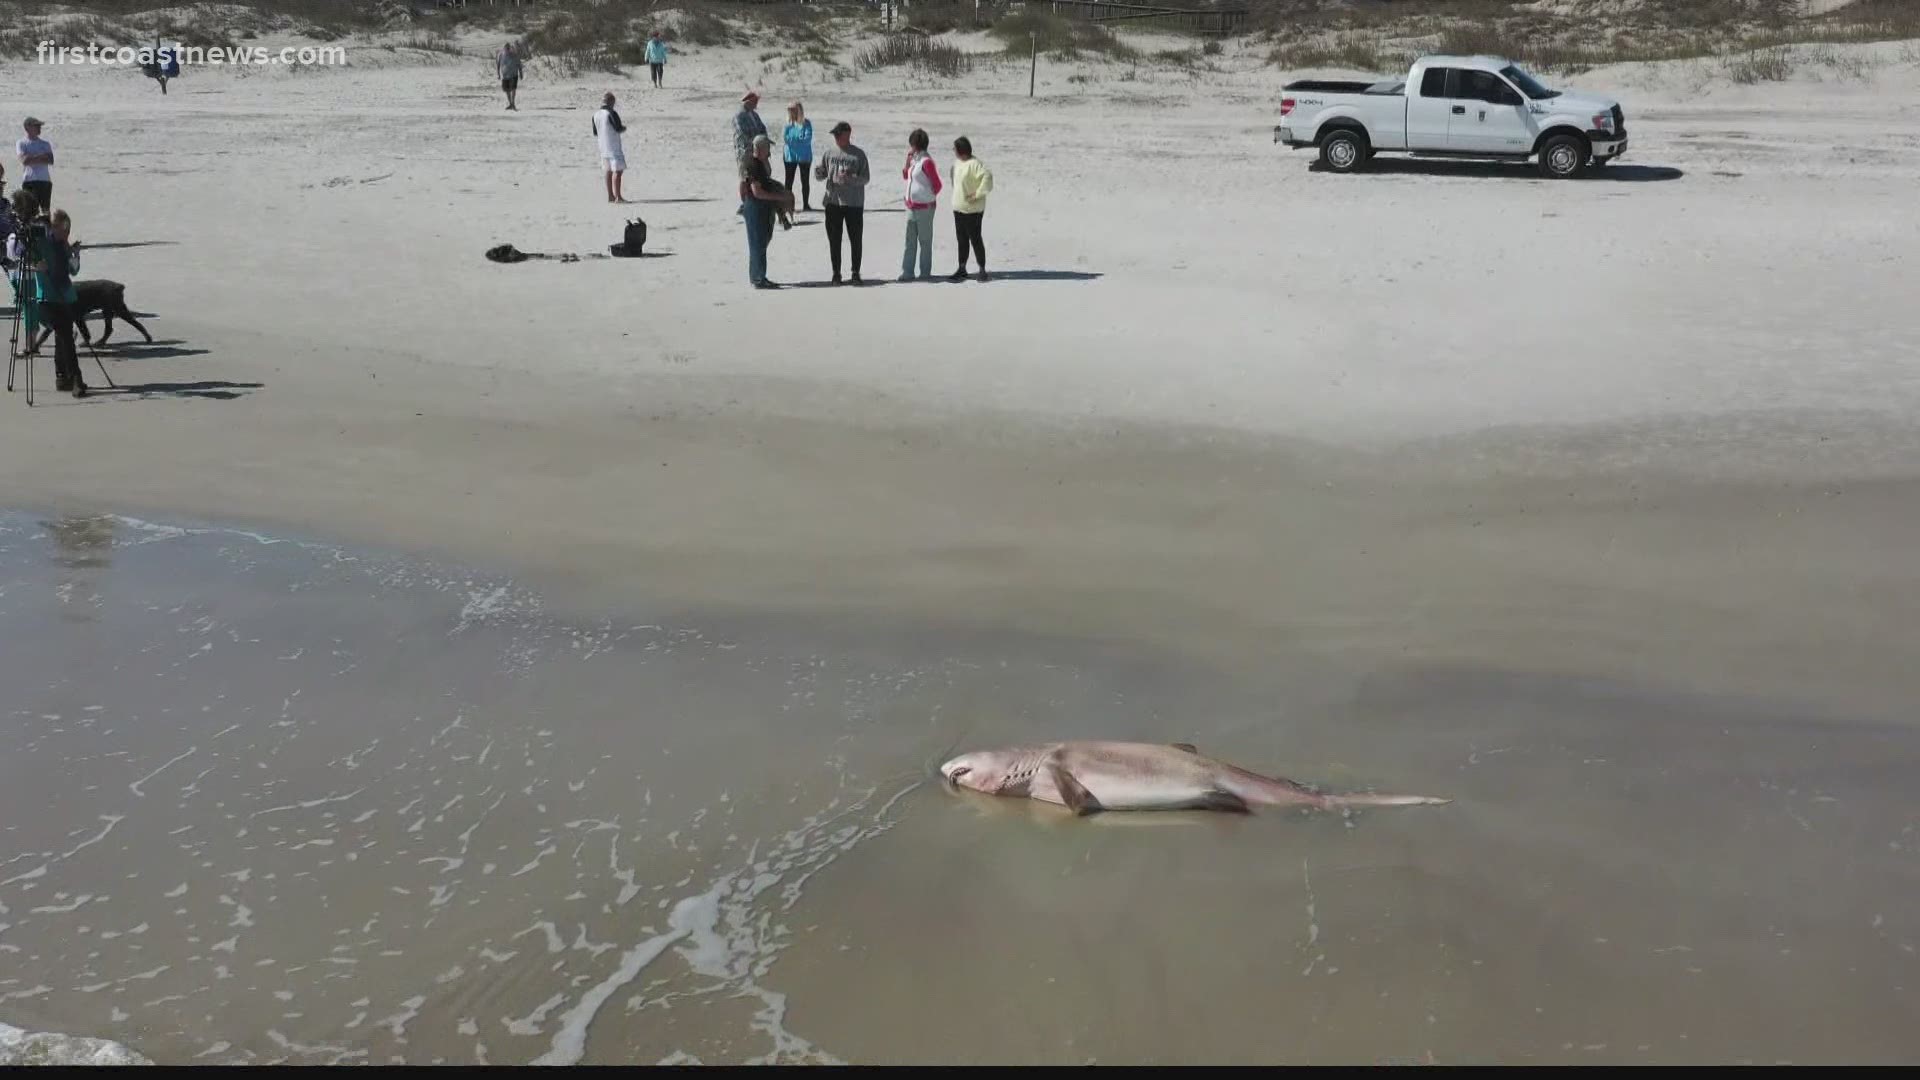 Duval County has fifth highest number of shark attacks nationwide |  